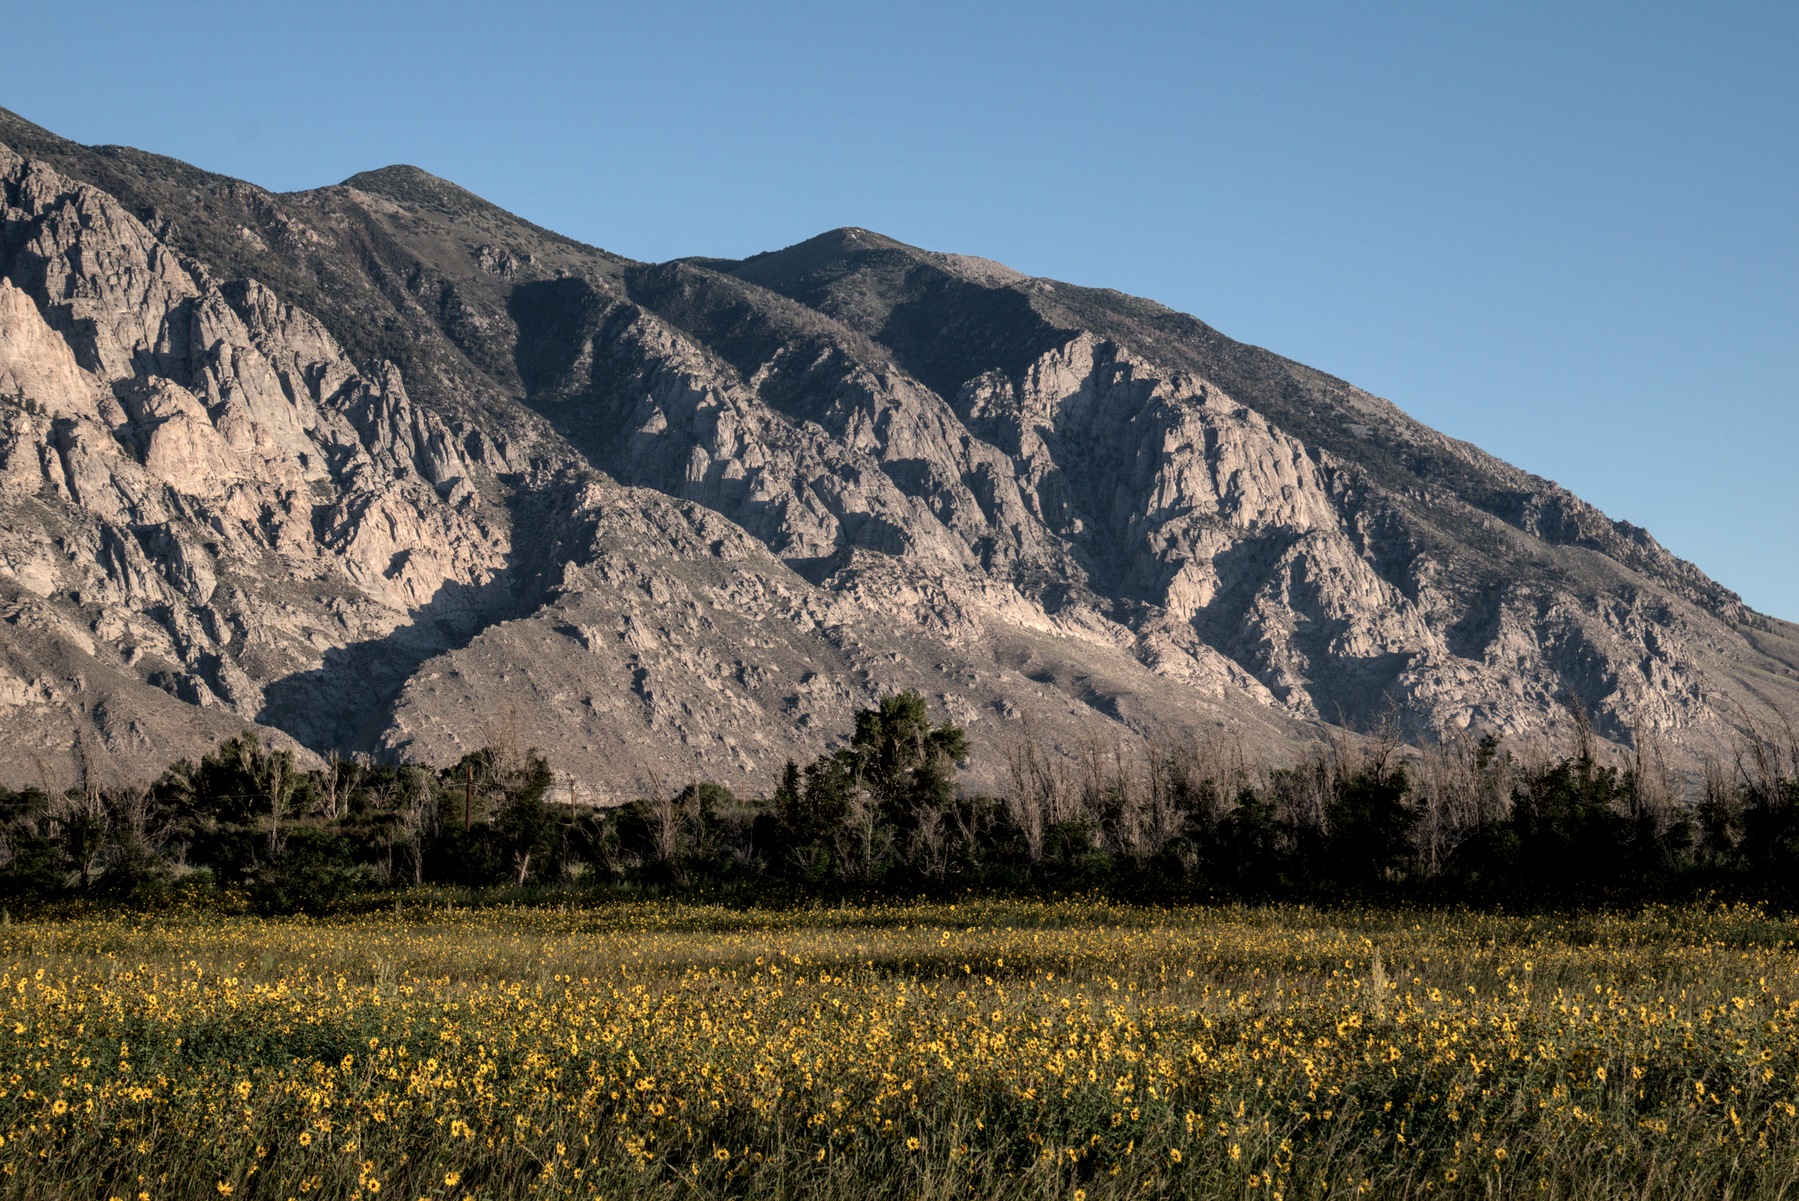 A field near the camera is full of yellow sunflowers all the way to trees surrounding a creek.  A high mountain ridge fills the background.